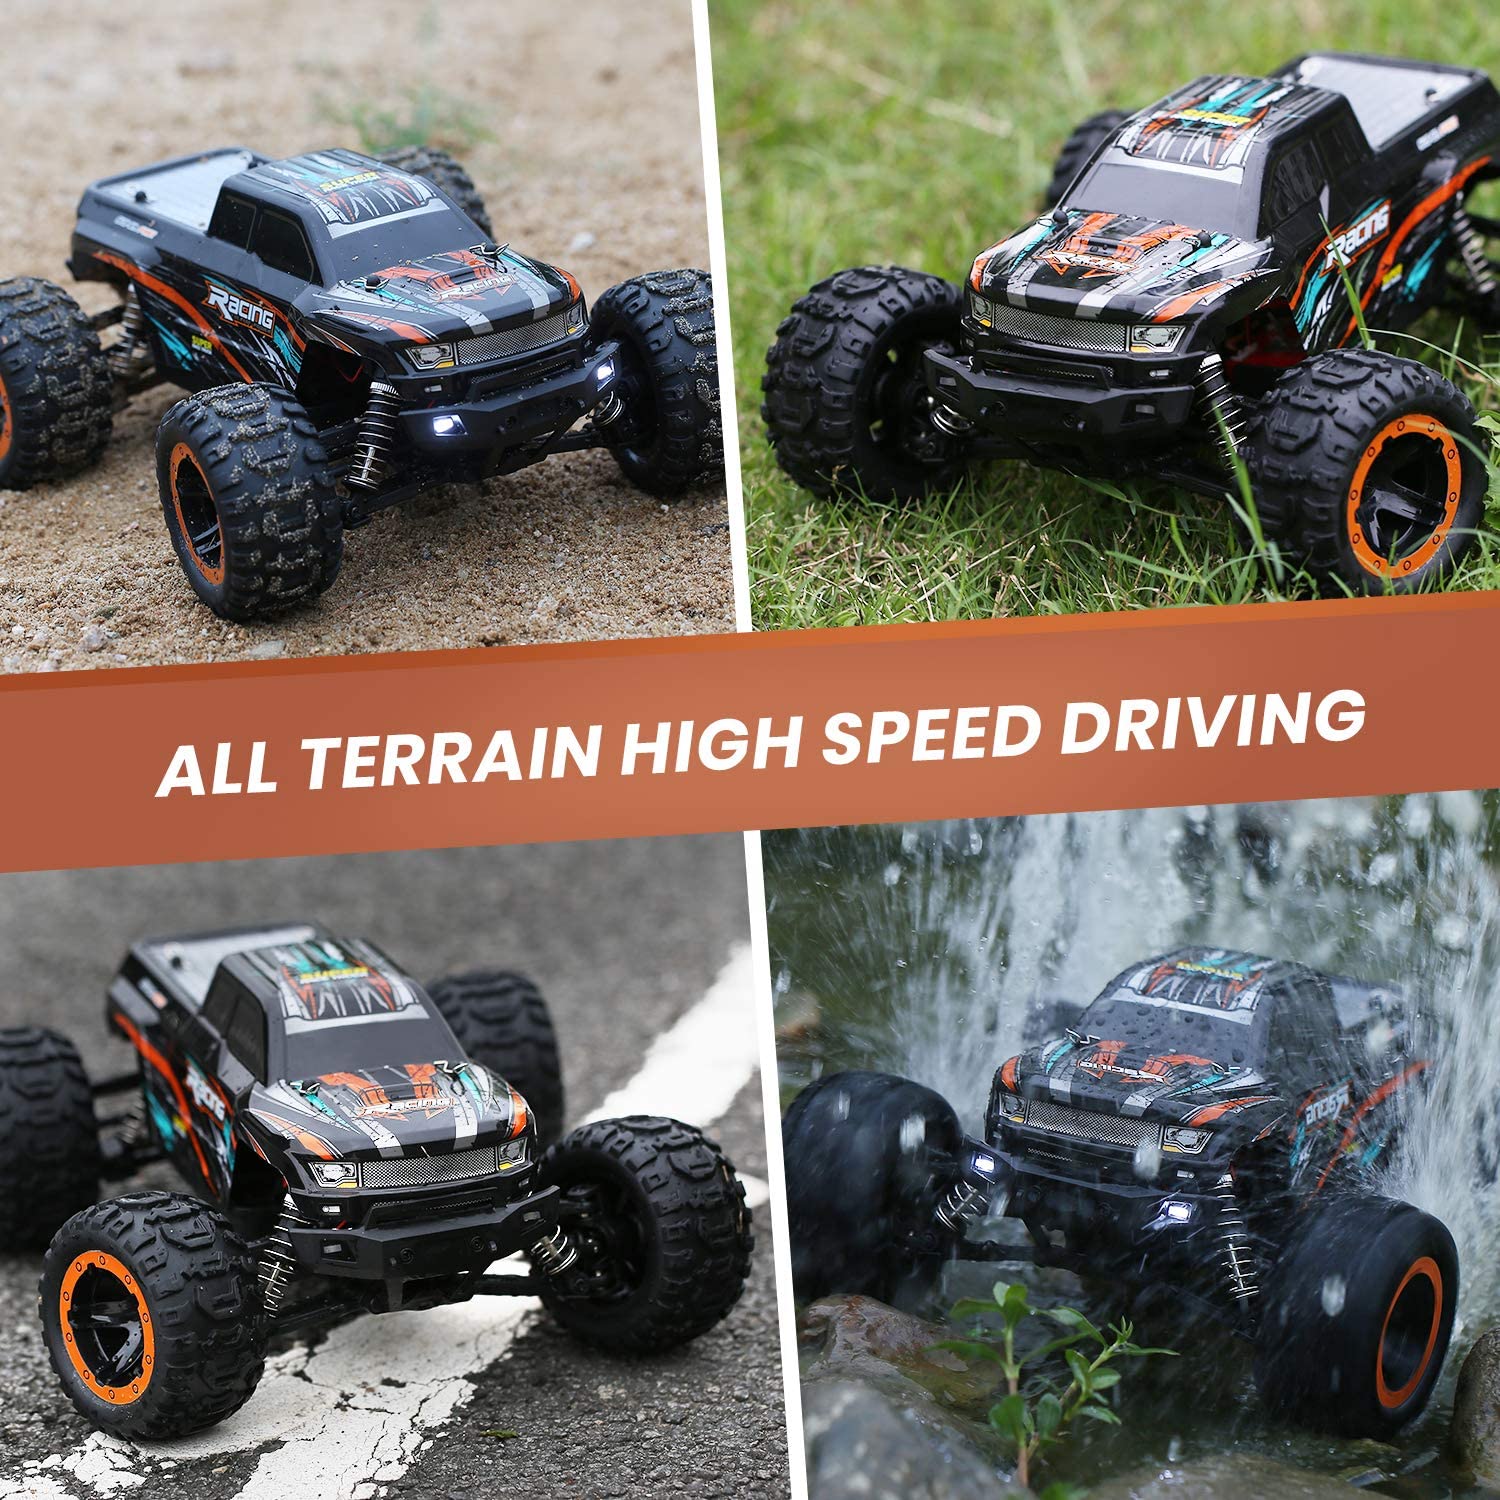 DEERC Car High Speed Remote Control Car 4WD Off Road Truck Vehicle 1:18 Scale 30+ MPH for Adults Gifts for Kids Play Outdoor 2 Batteries